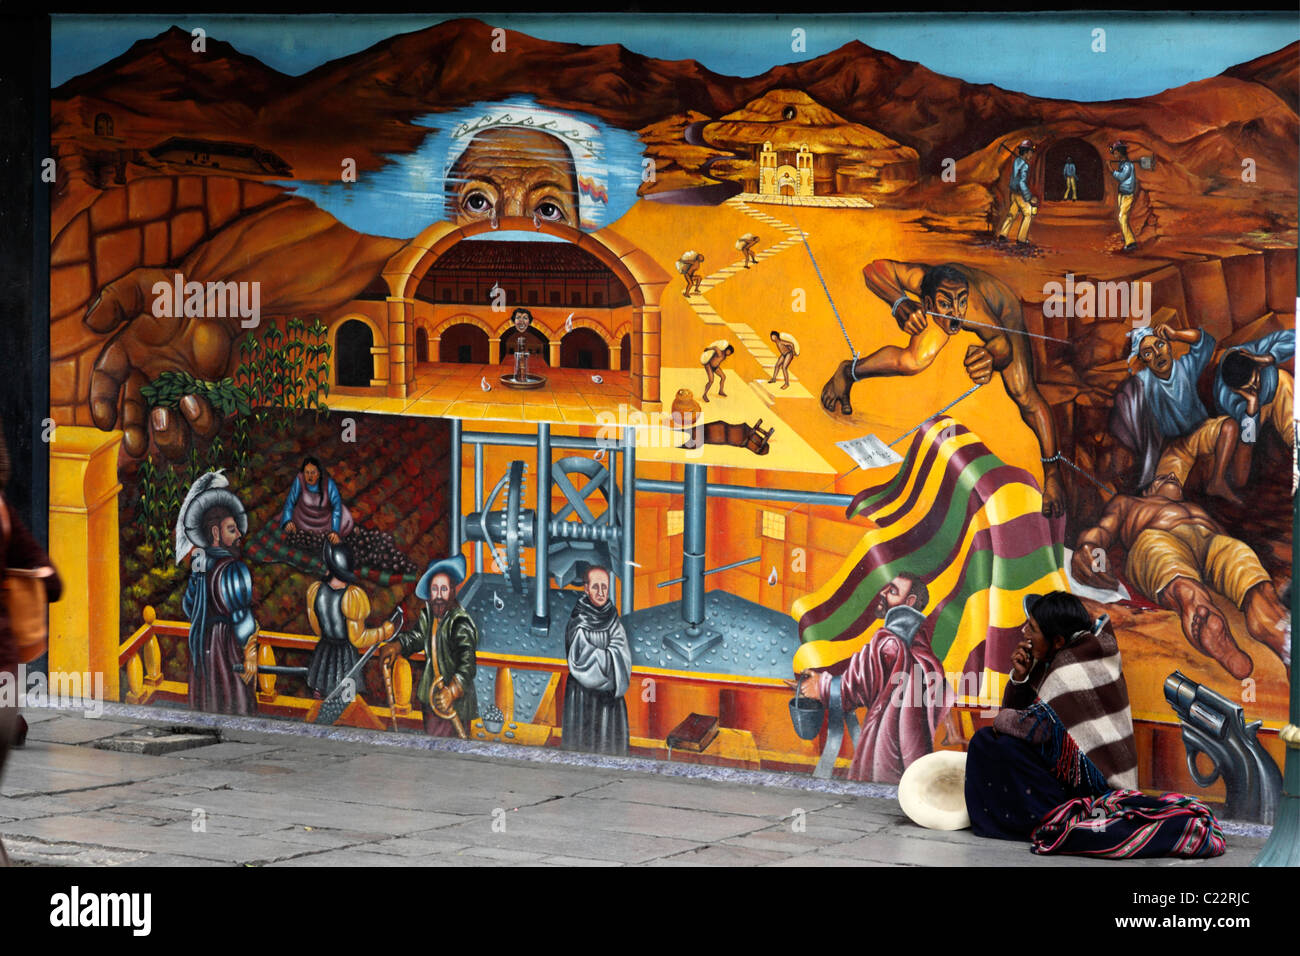 Lady from Potosi region begging in front of mural showing repression of natives in Potosi silver mines back in colonial times, La Paz, Bolivia Stock Photo